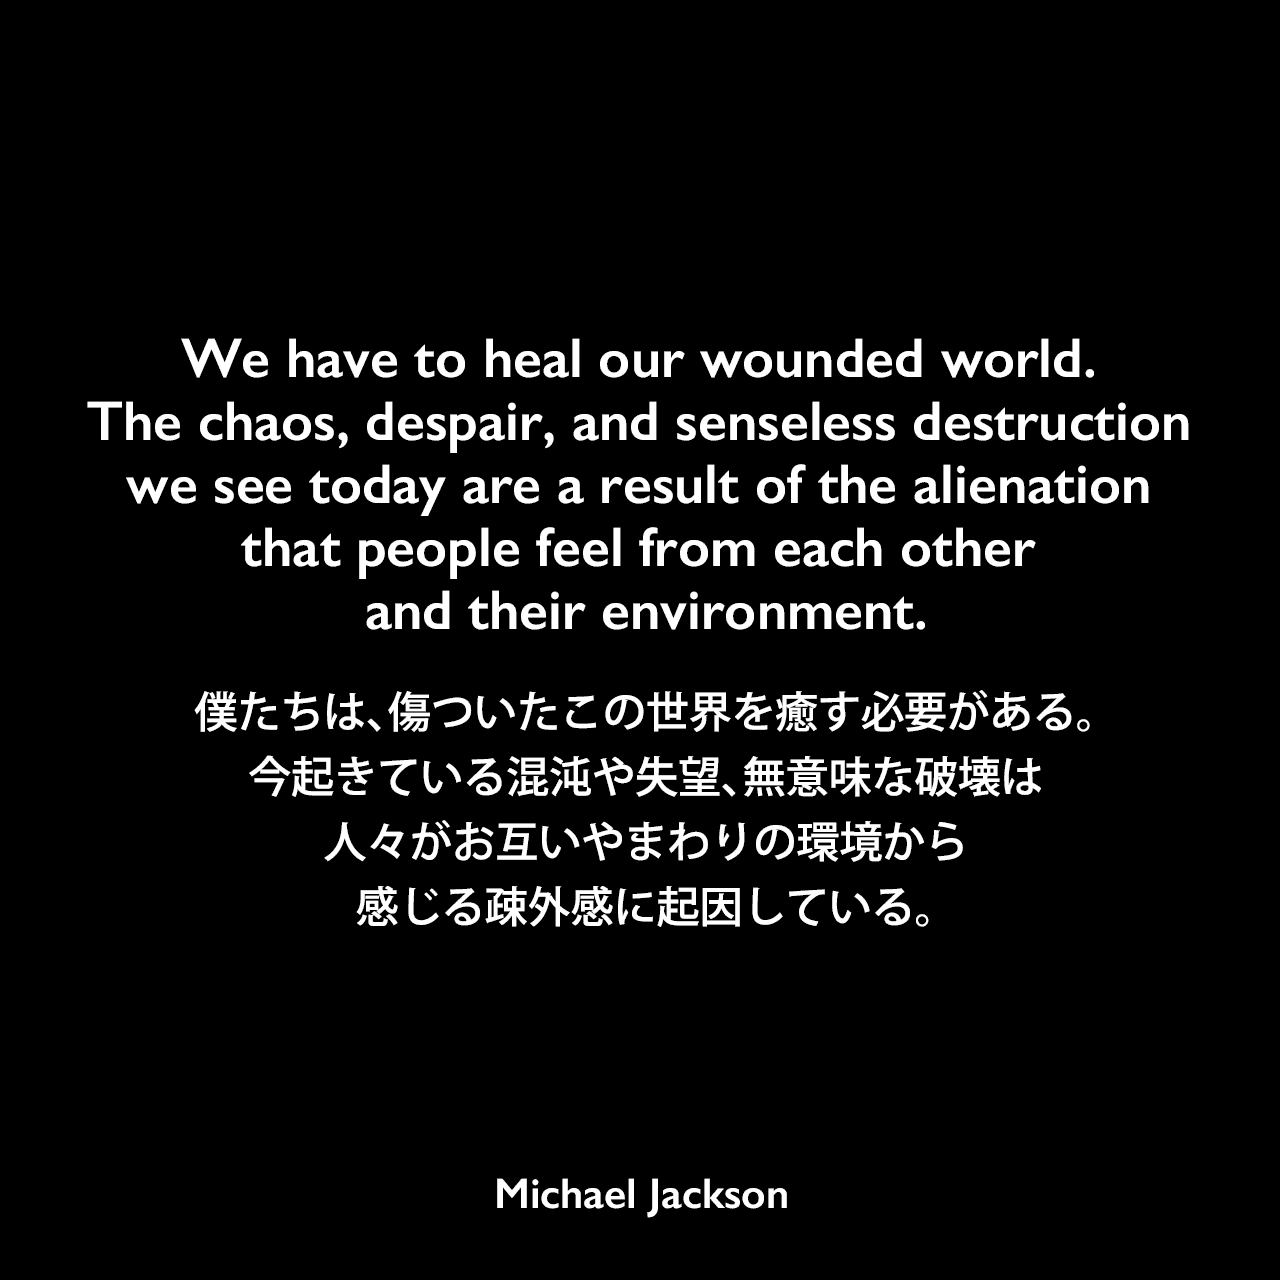 We have to heal our wounded world. The chaos, despair, and senseless destruction we see today are a result of the alienation that people feel from each other and their environment.僕たちは、傷ついたこの世界を癒す必要がある。今起きている混沌や失望、無意味な破壊は、人々がお互いやまわりの環境から感じる疎外感に起因している。Michael Jackson